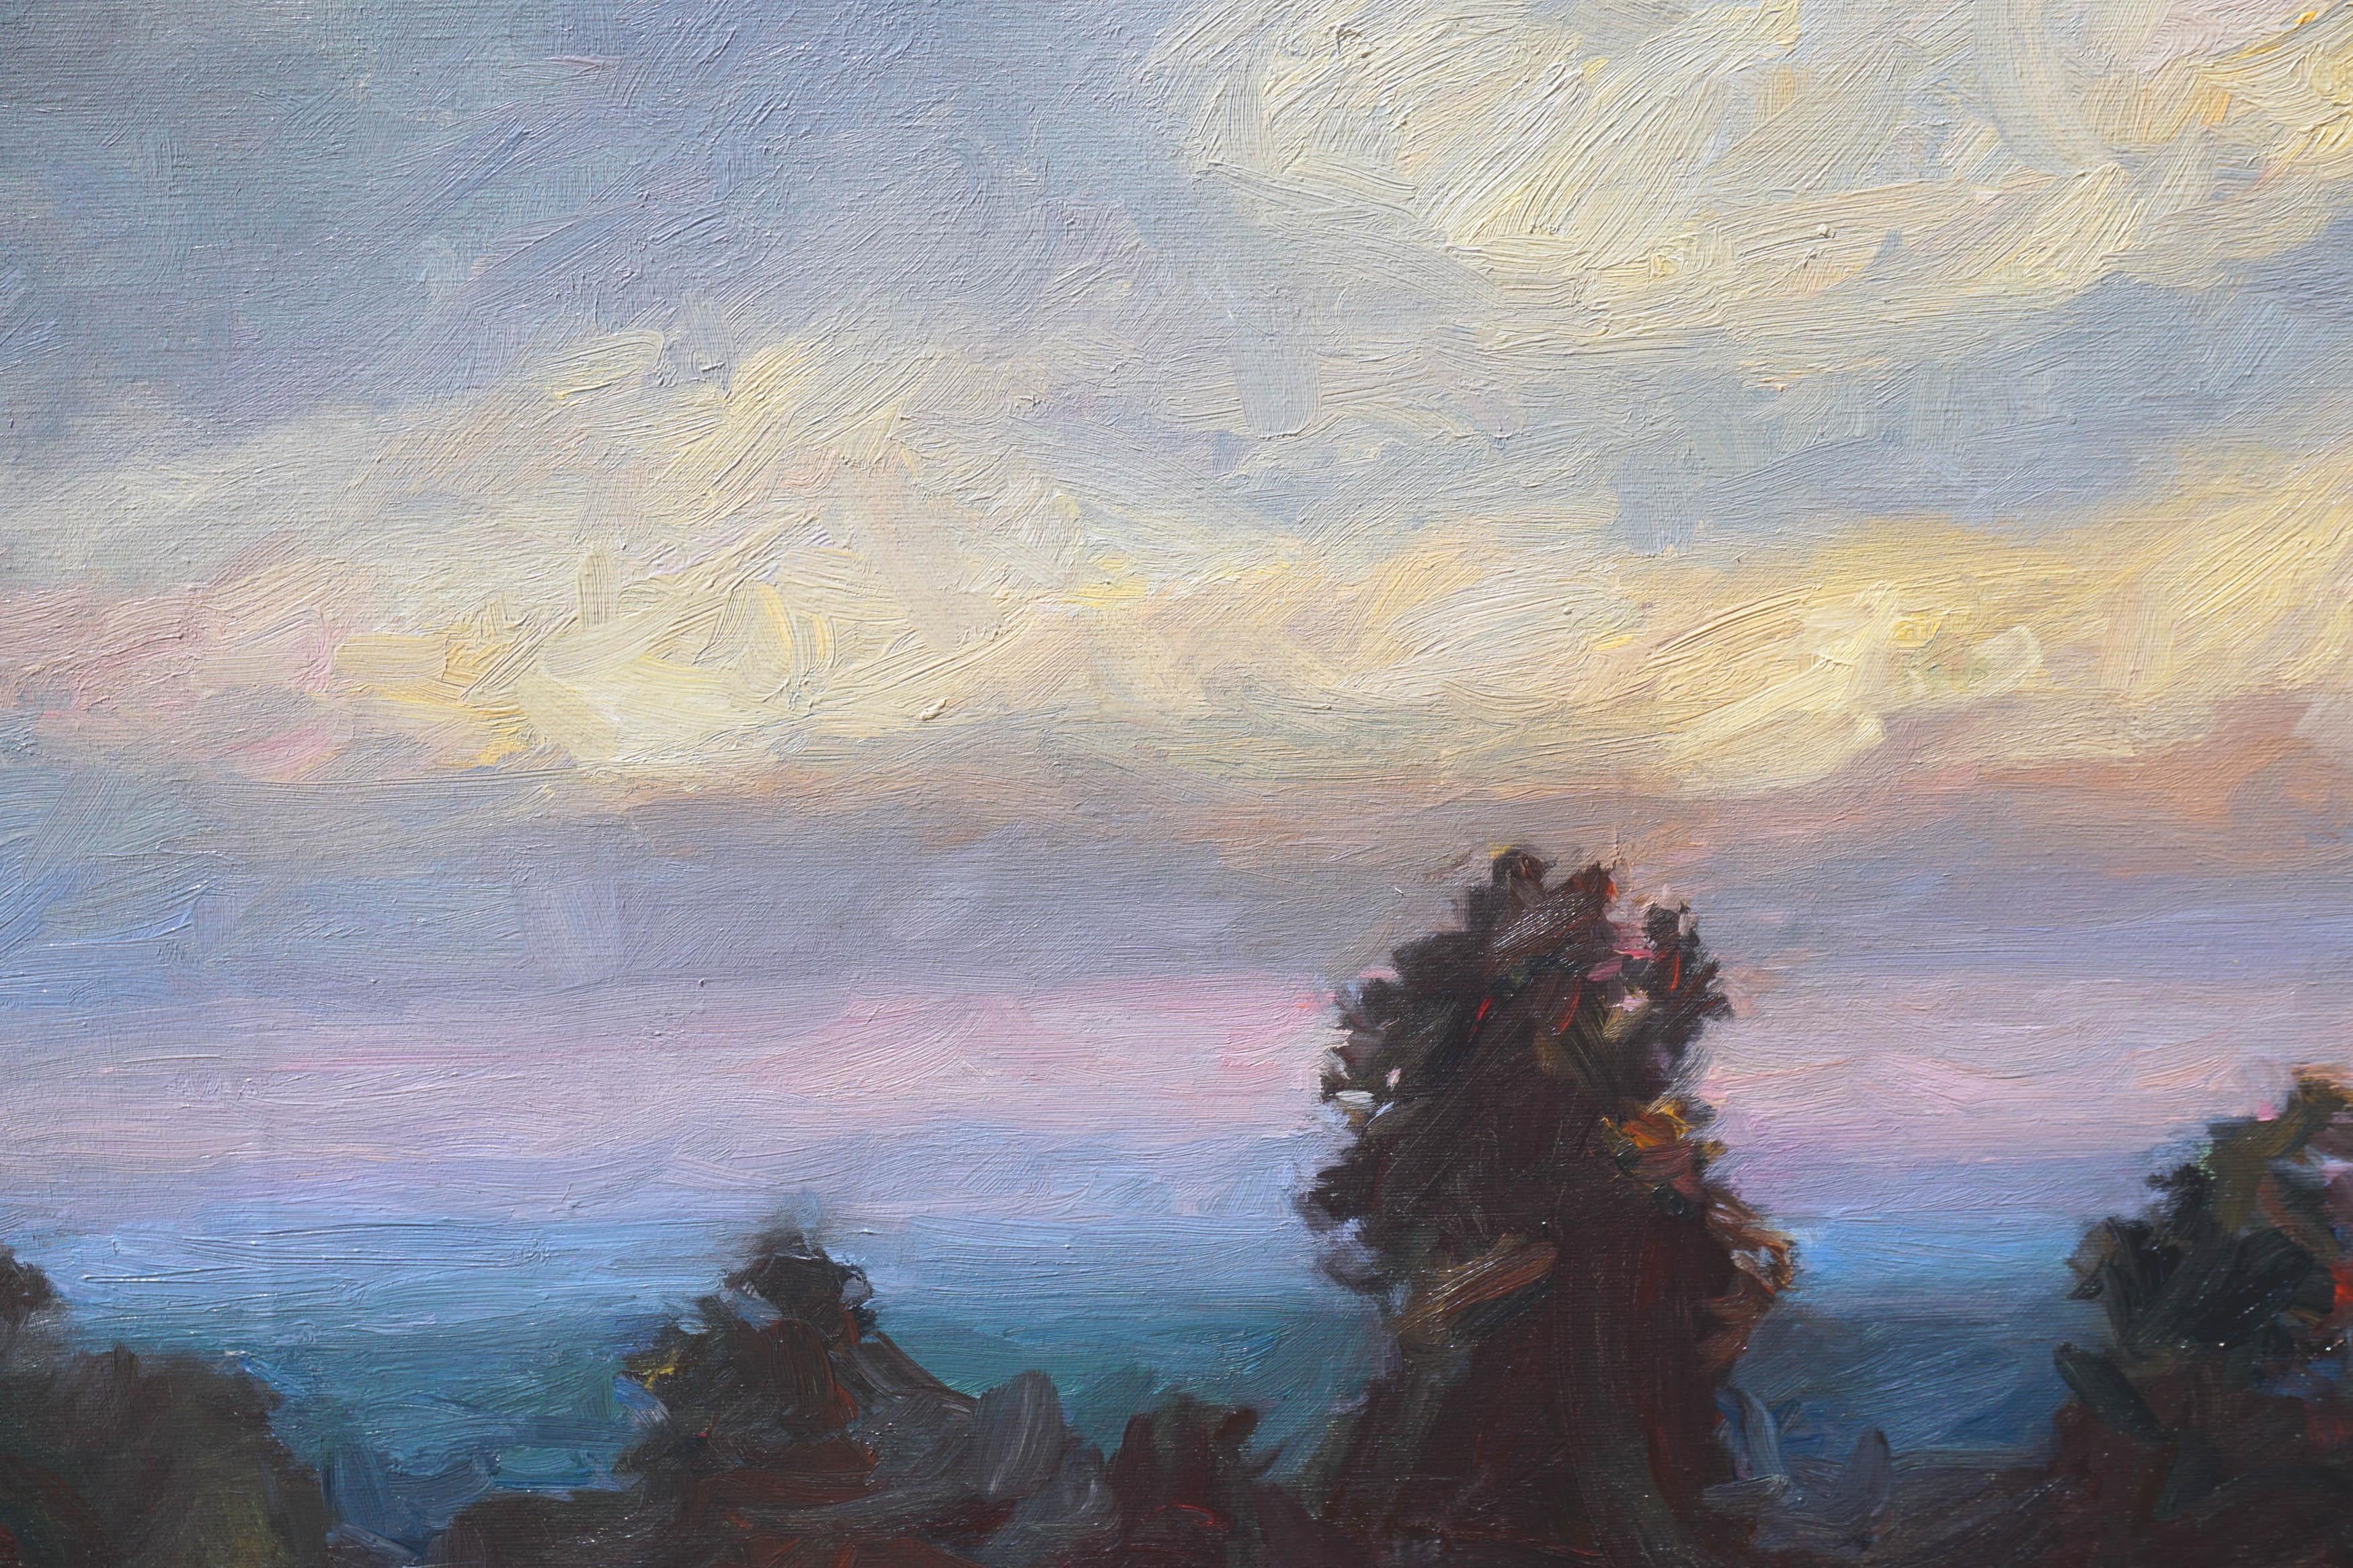 Santa Cruz Mountains at Twilight, Pacific Ocean View California Landscape - Painting by Unknown